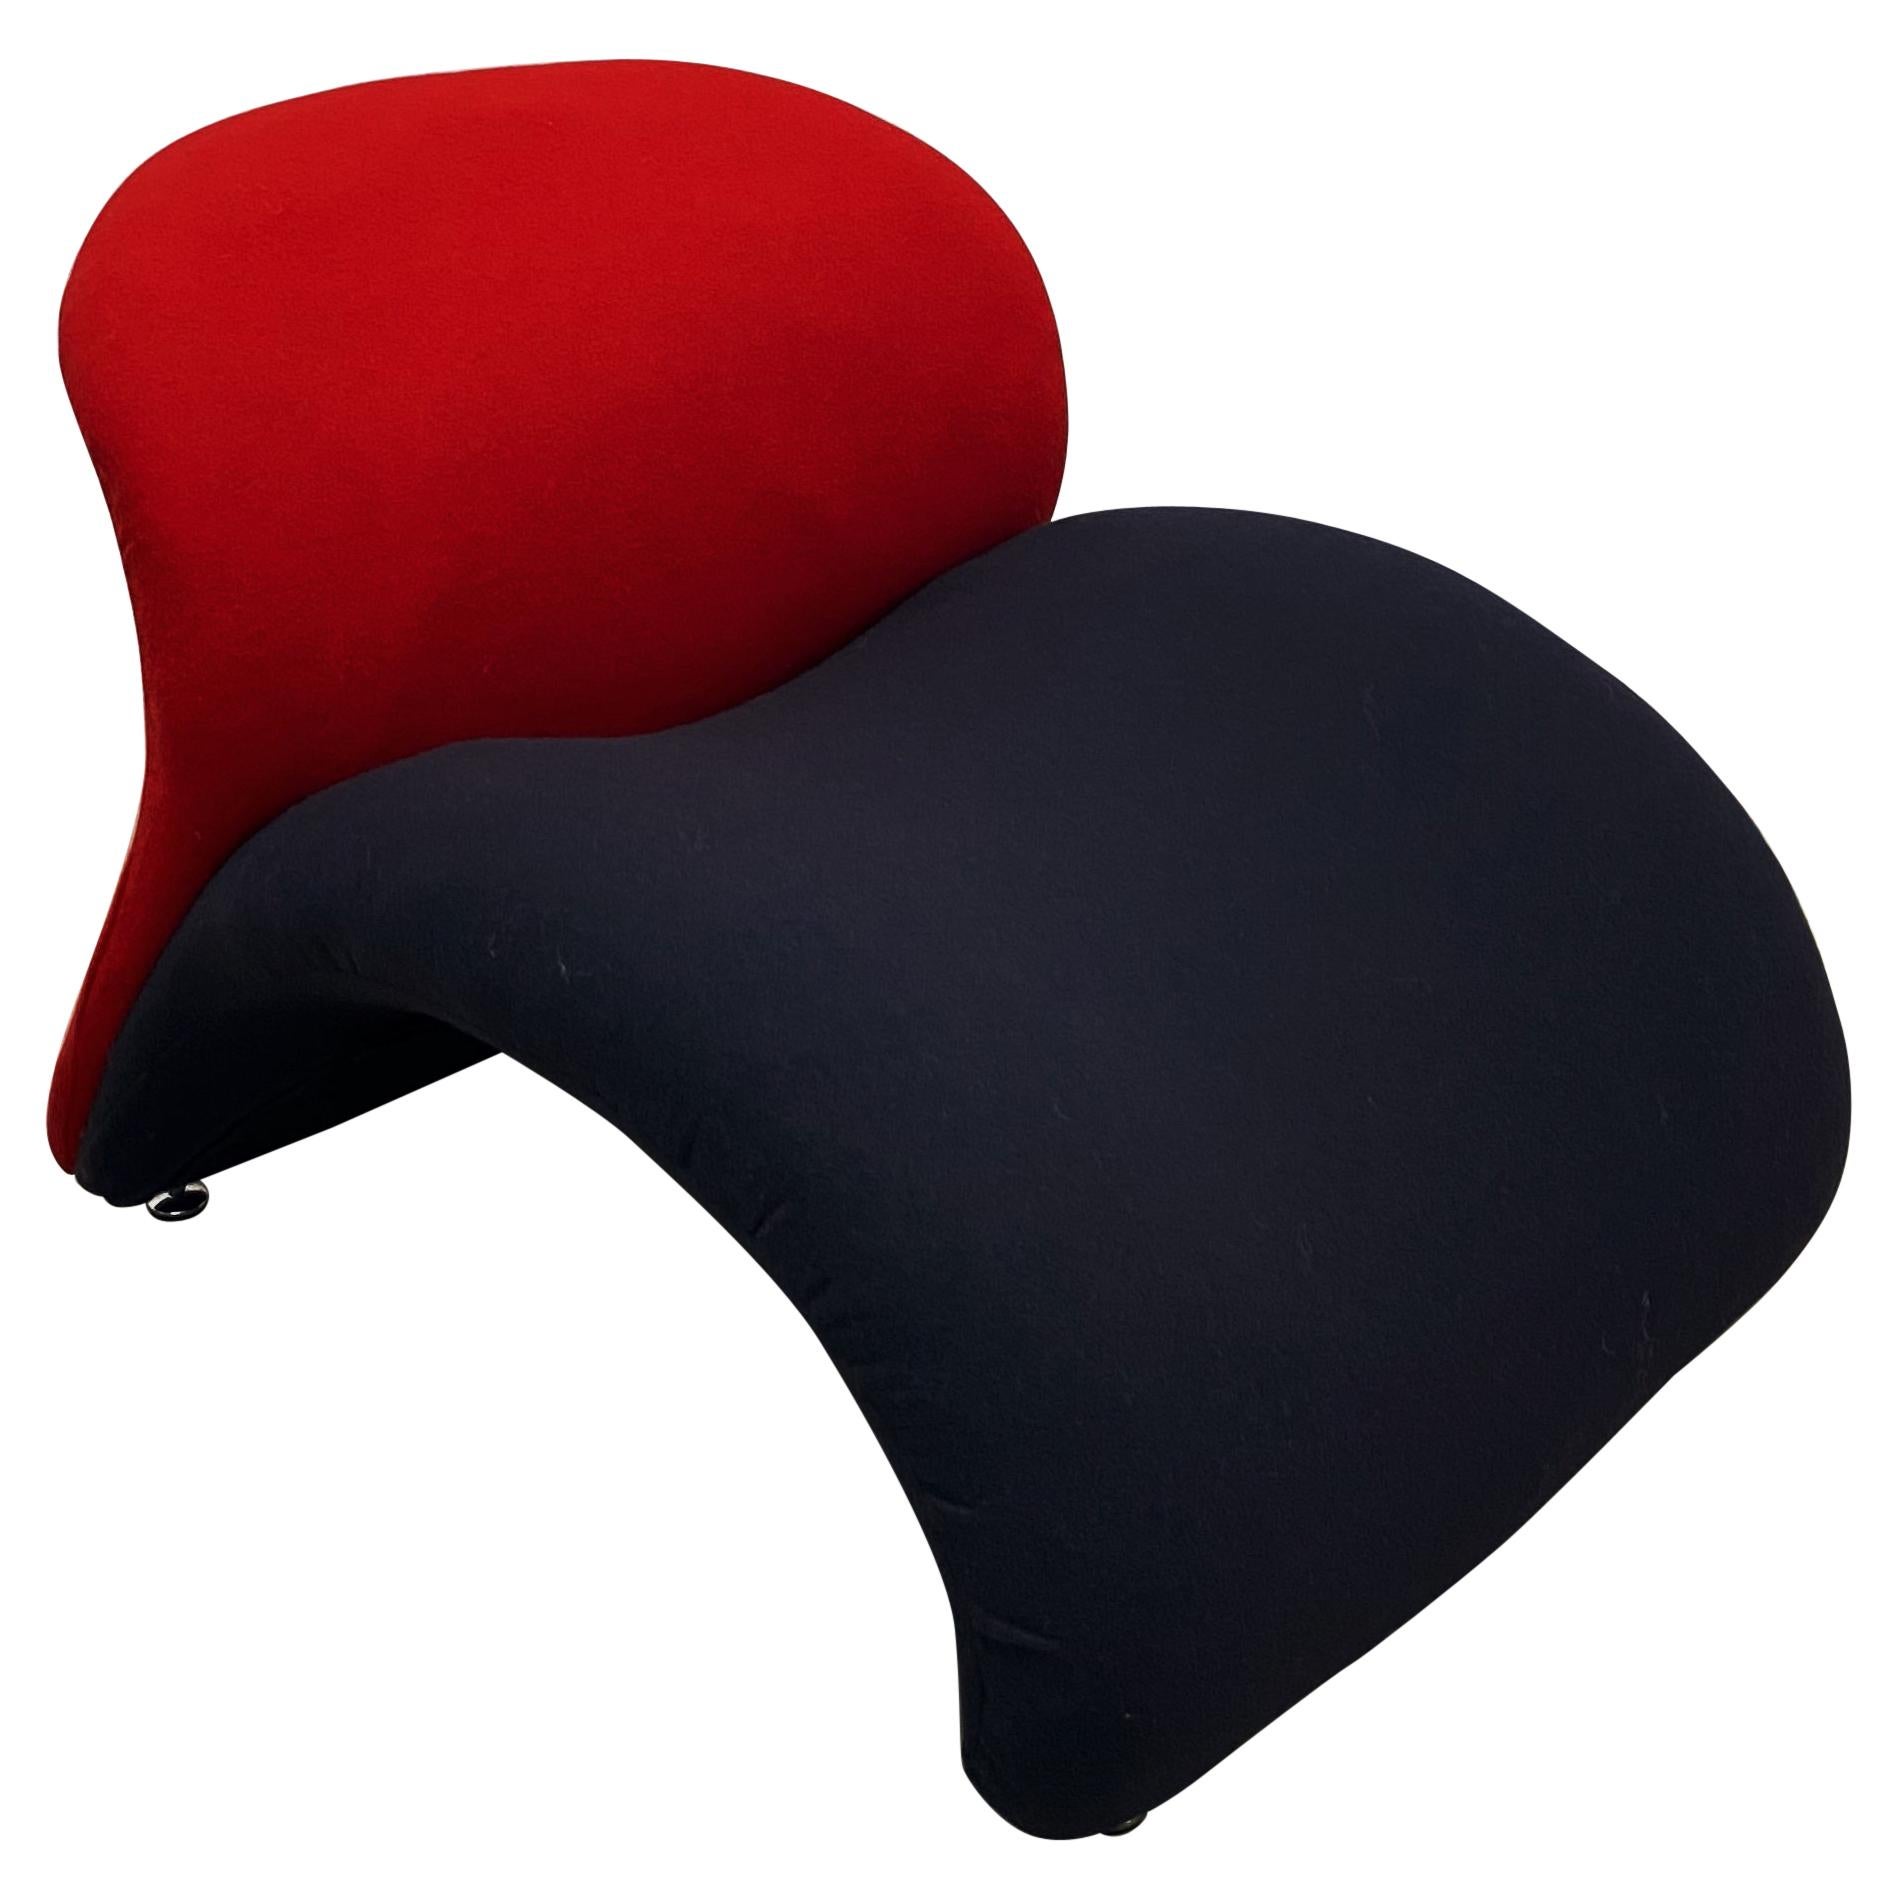 Pierre Paulin "Le Chat" Black & Red Lounge Chair for Artifort For Sale